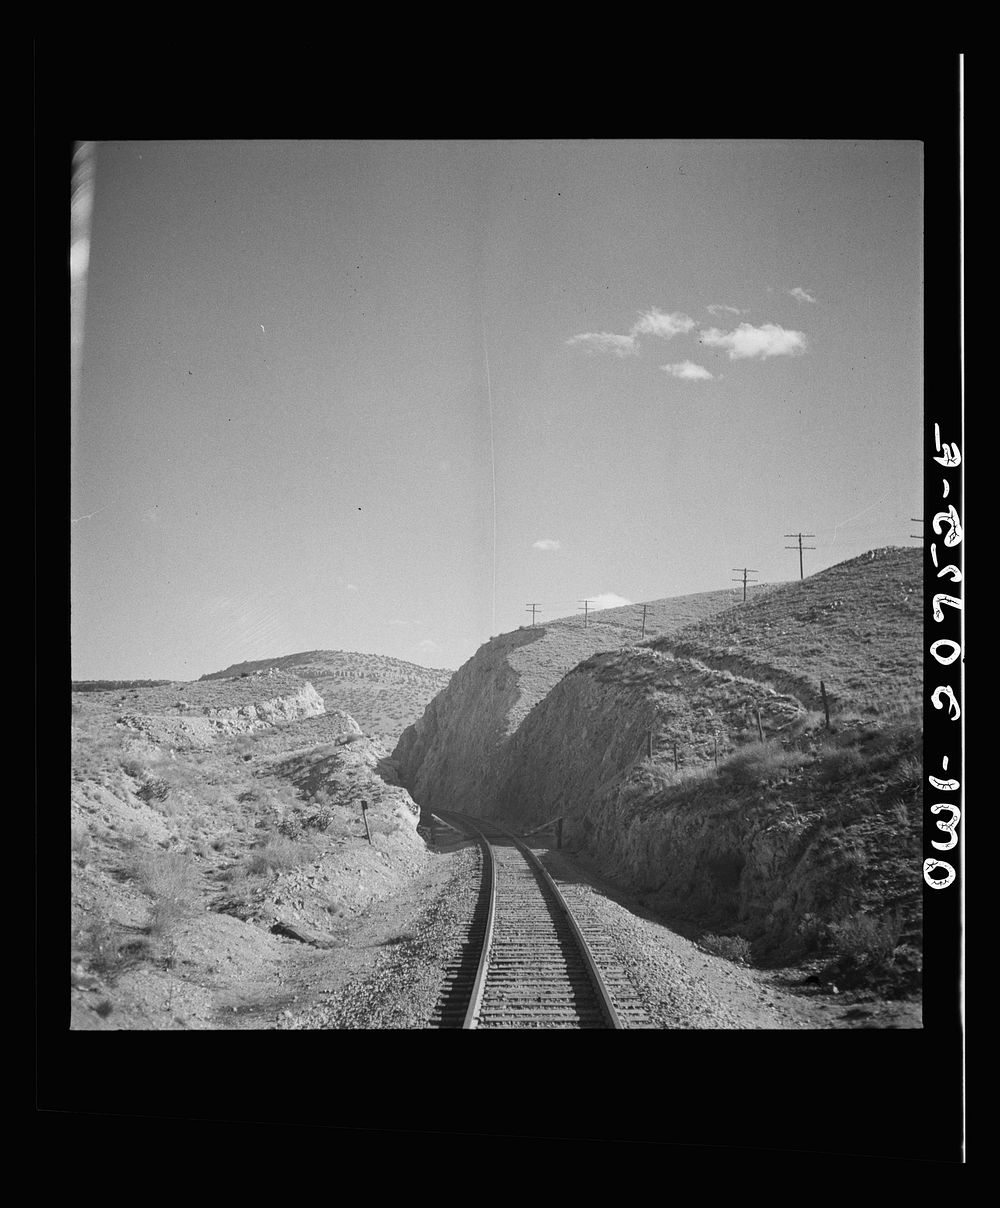 [Untitled photo, possibly related to: Coming out of the mountains on the Atchison, Topeka and Santa Fe Railroad between…